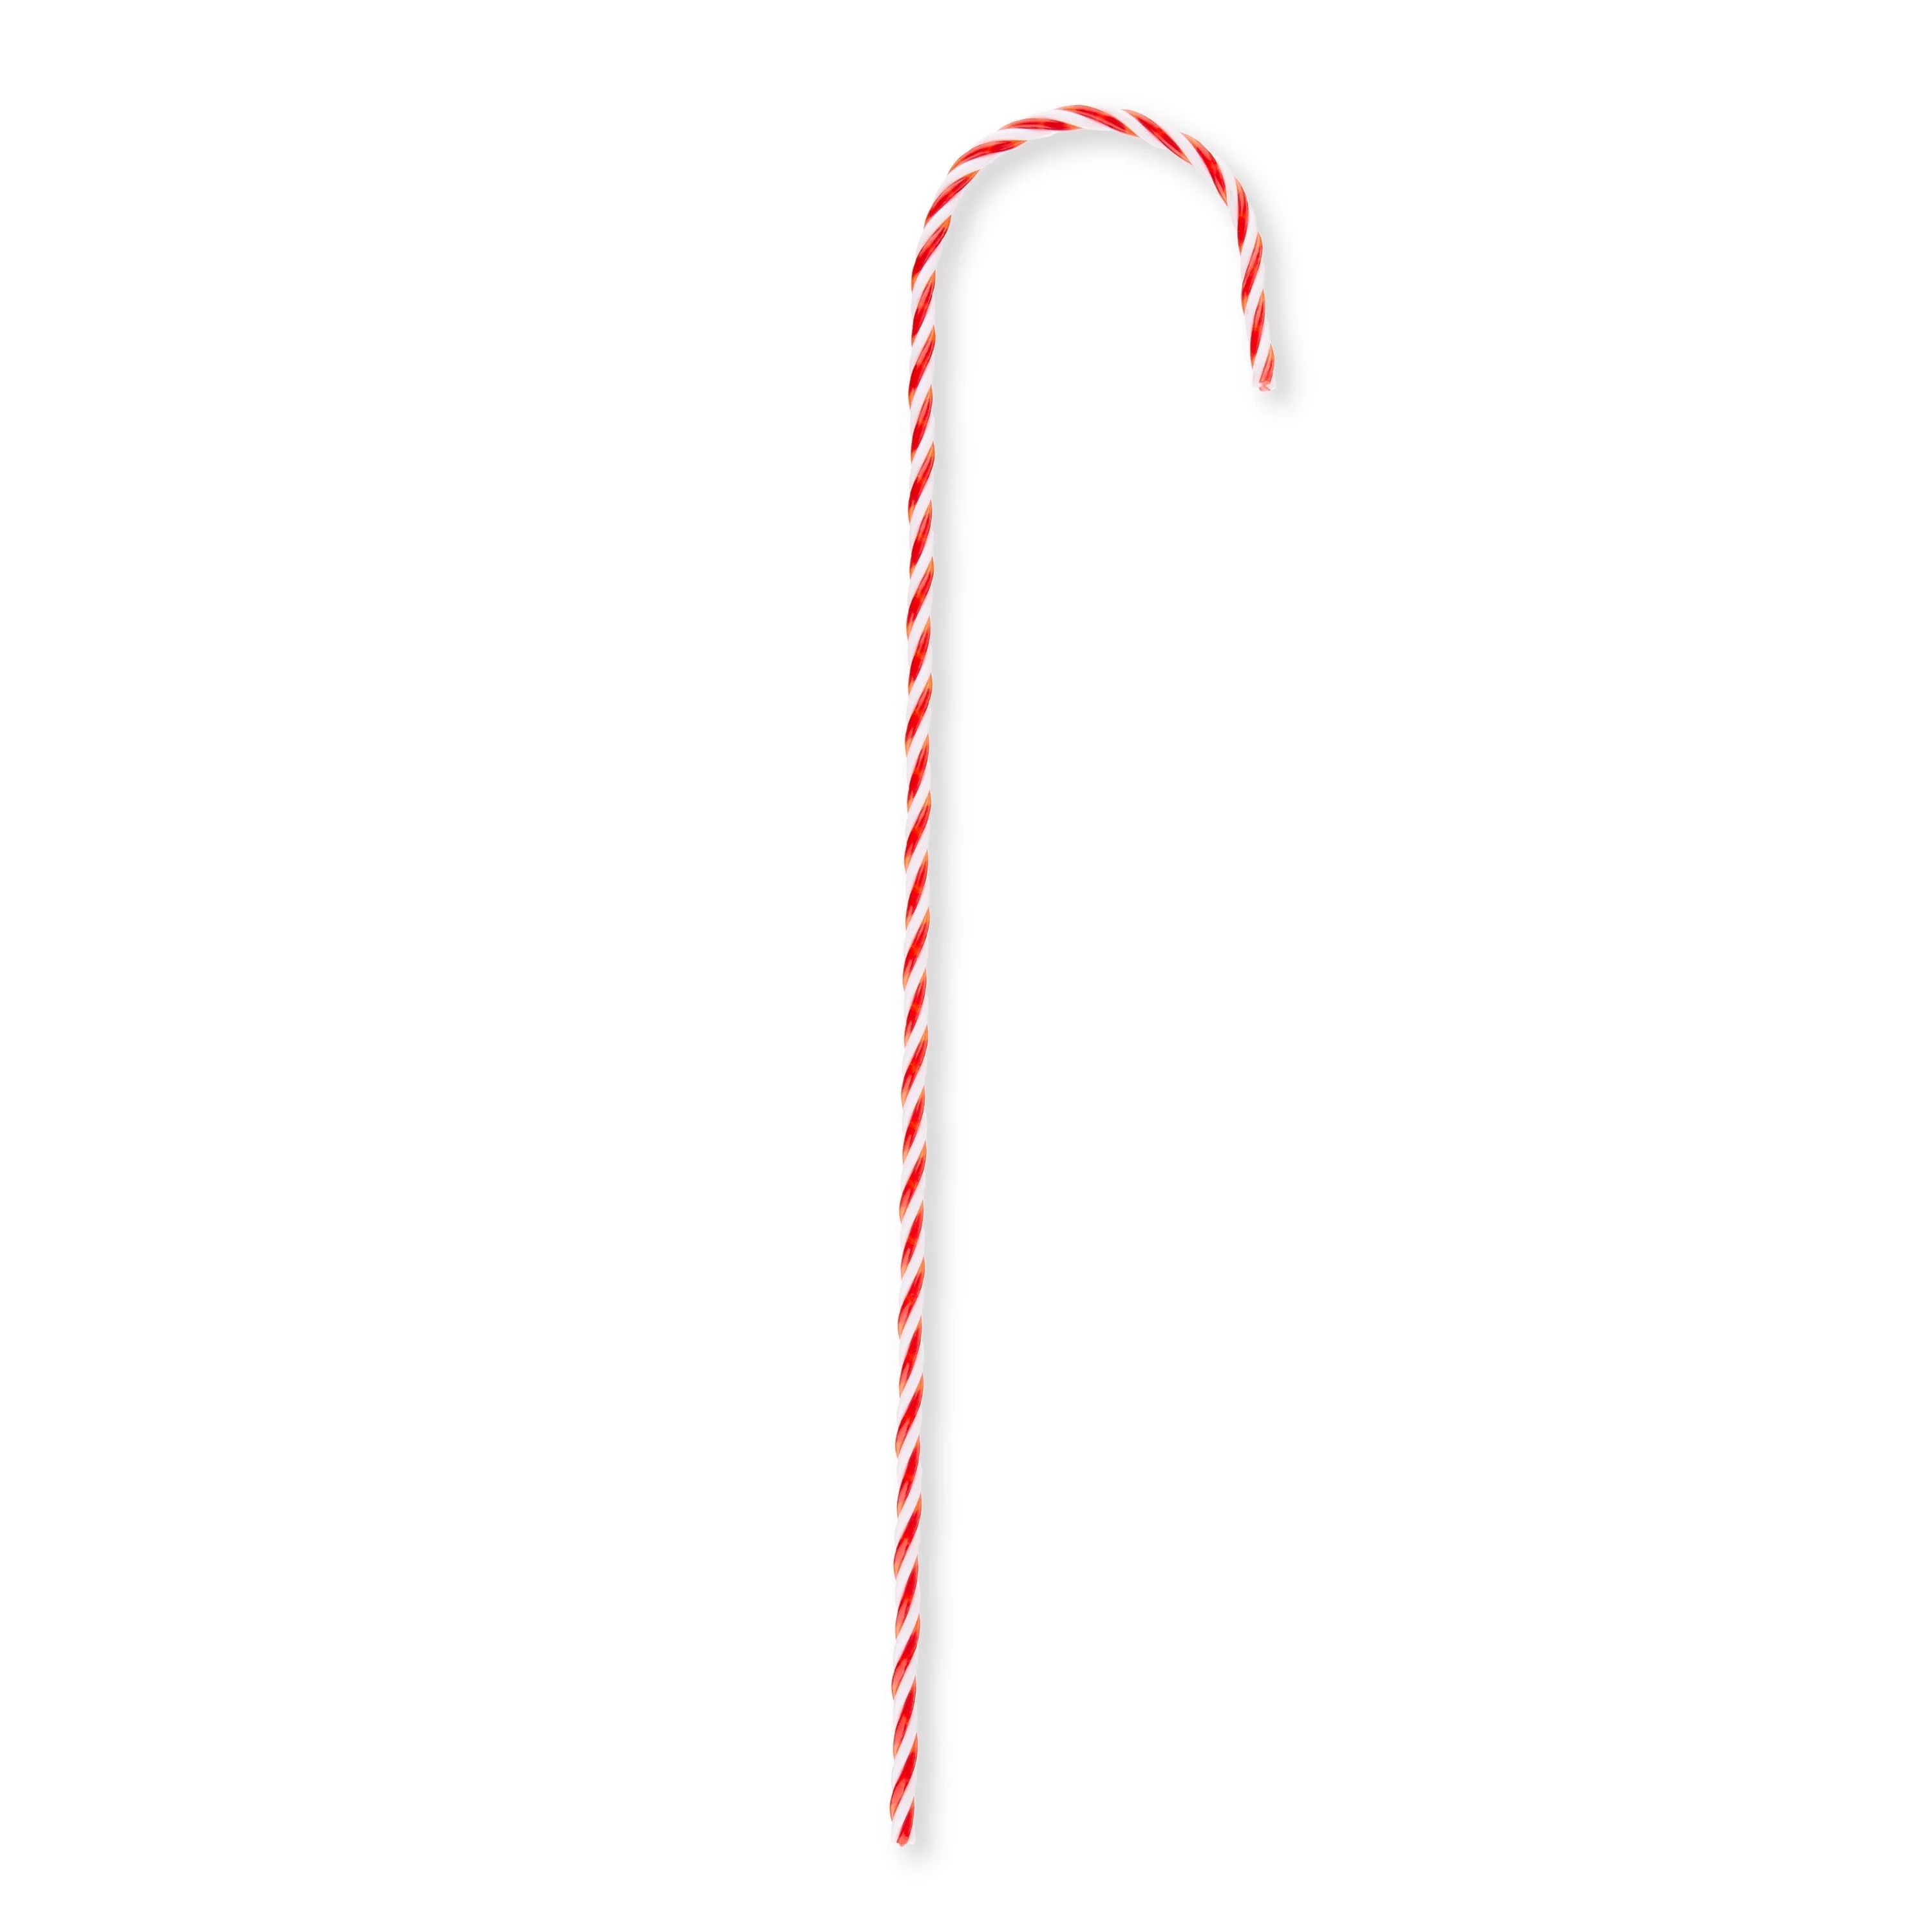 Decorative Christmas Red and WhiteTwisty Candy Cane Yard Stake Decor, 25 in, by Holiday Time - Wa... | Walmart (US)